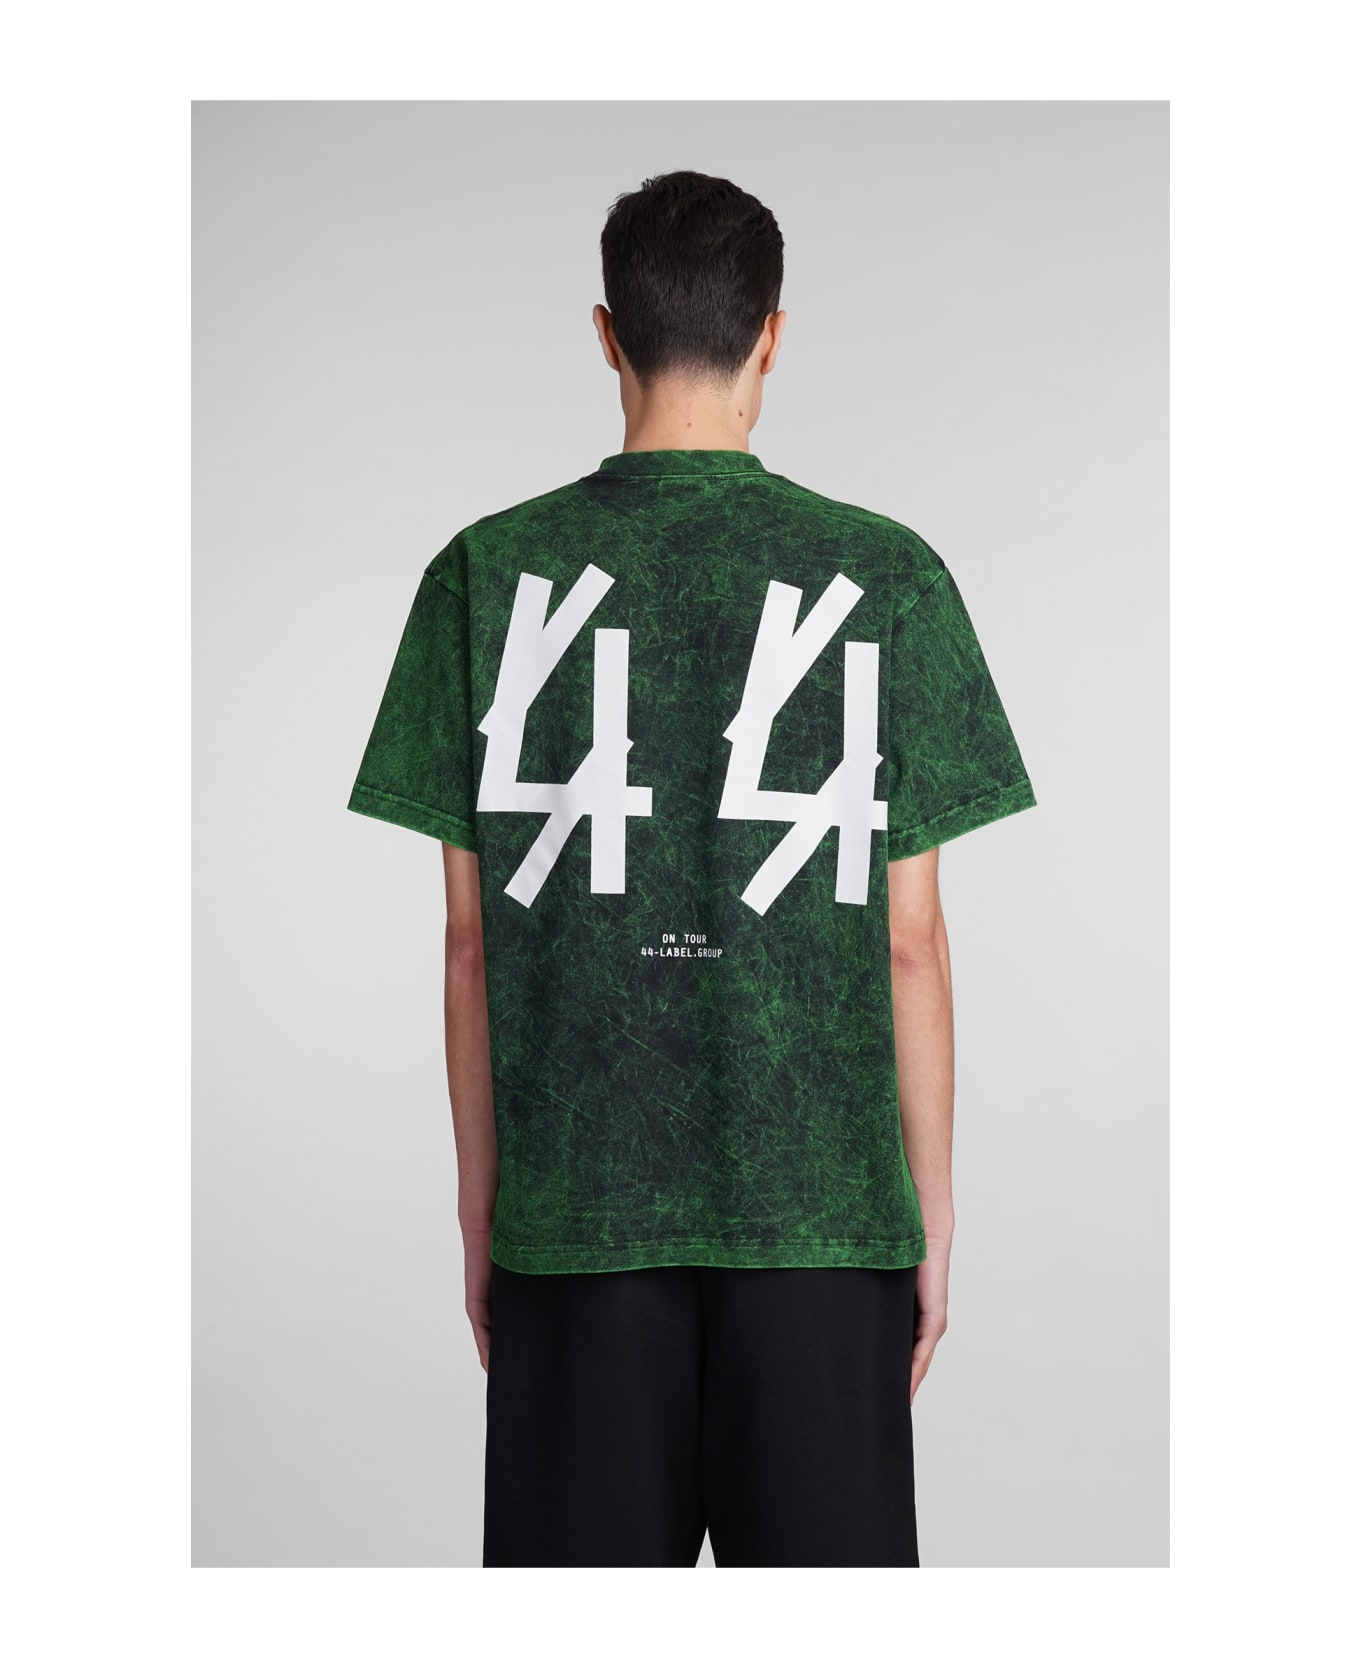 44 Label Group T-shirt In Green Cotton - Blk+sol.green + 44 solid シャツ